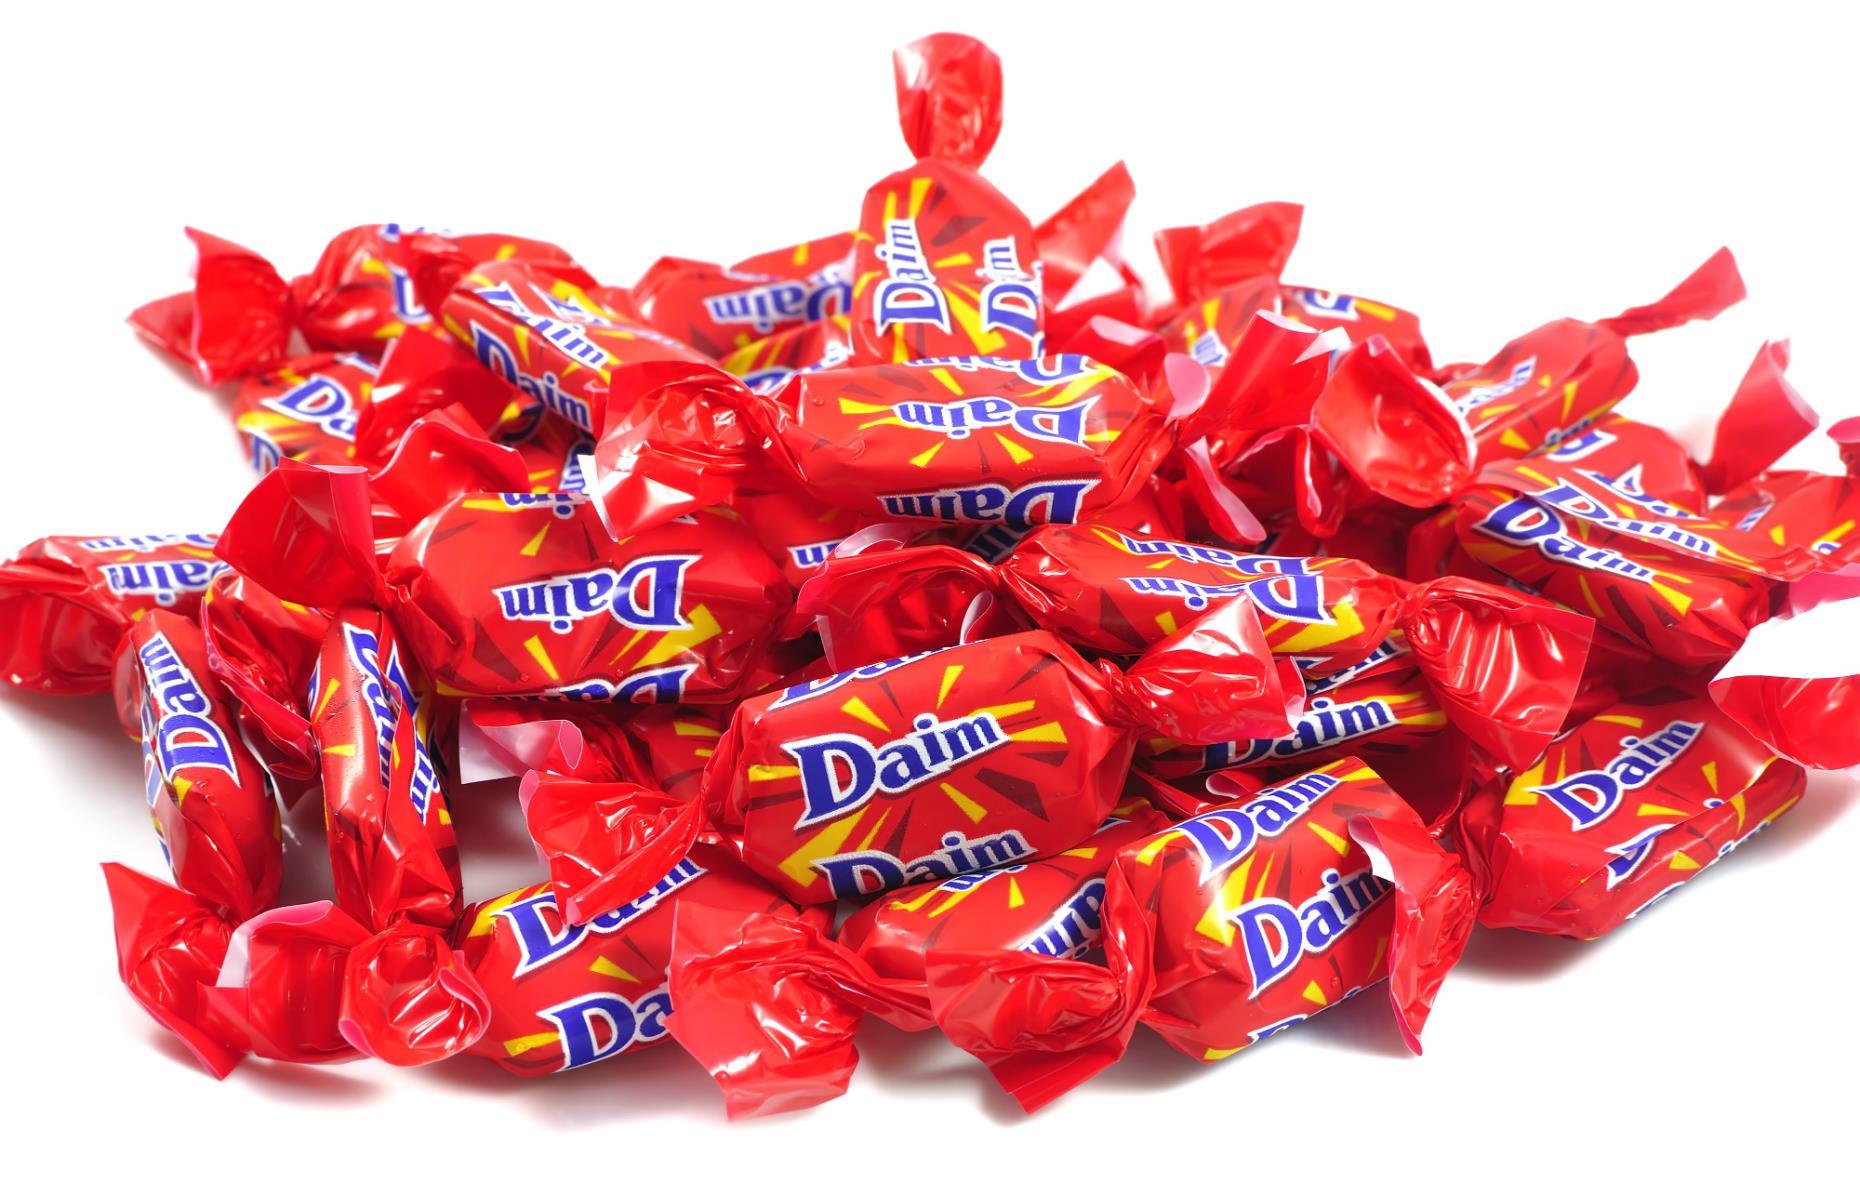 Daim, formerly Dime Bar in the UK